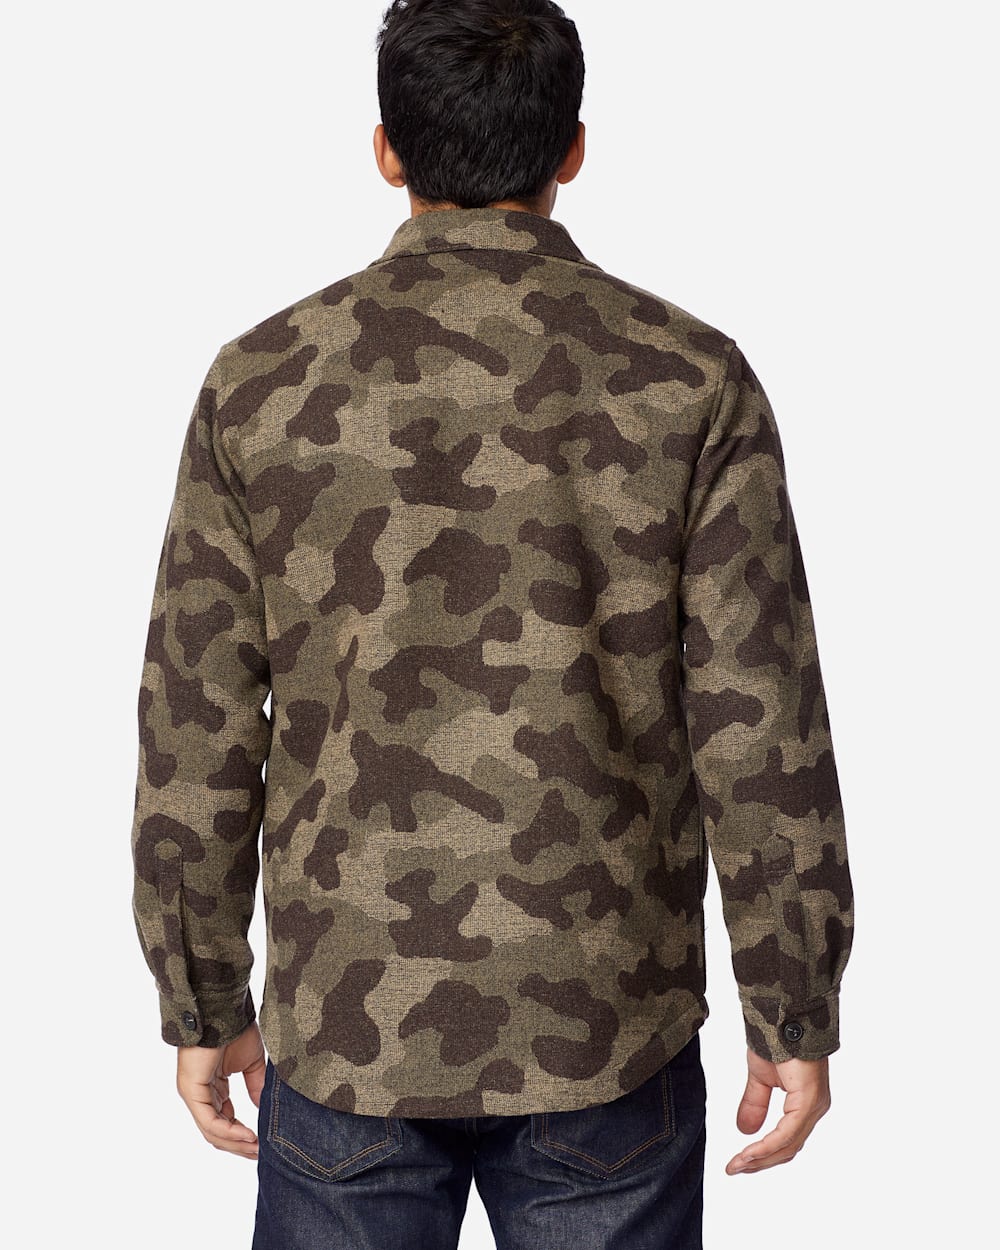 ALTERNATE VIEW OF MEN'S CAMO JACQUARD QUILTED SHIRT JACKET IN CAMO image number 3